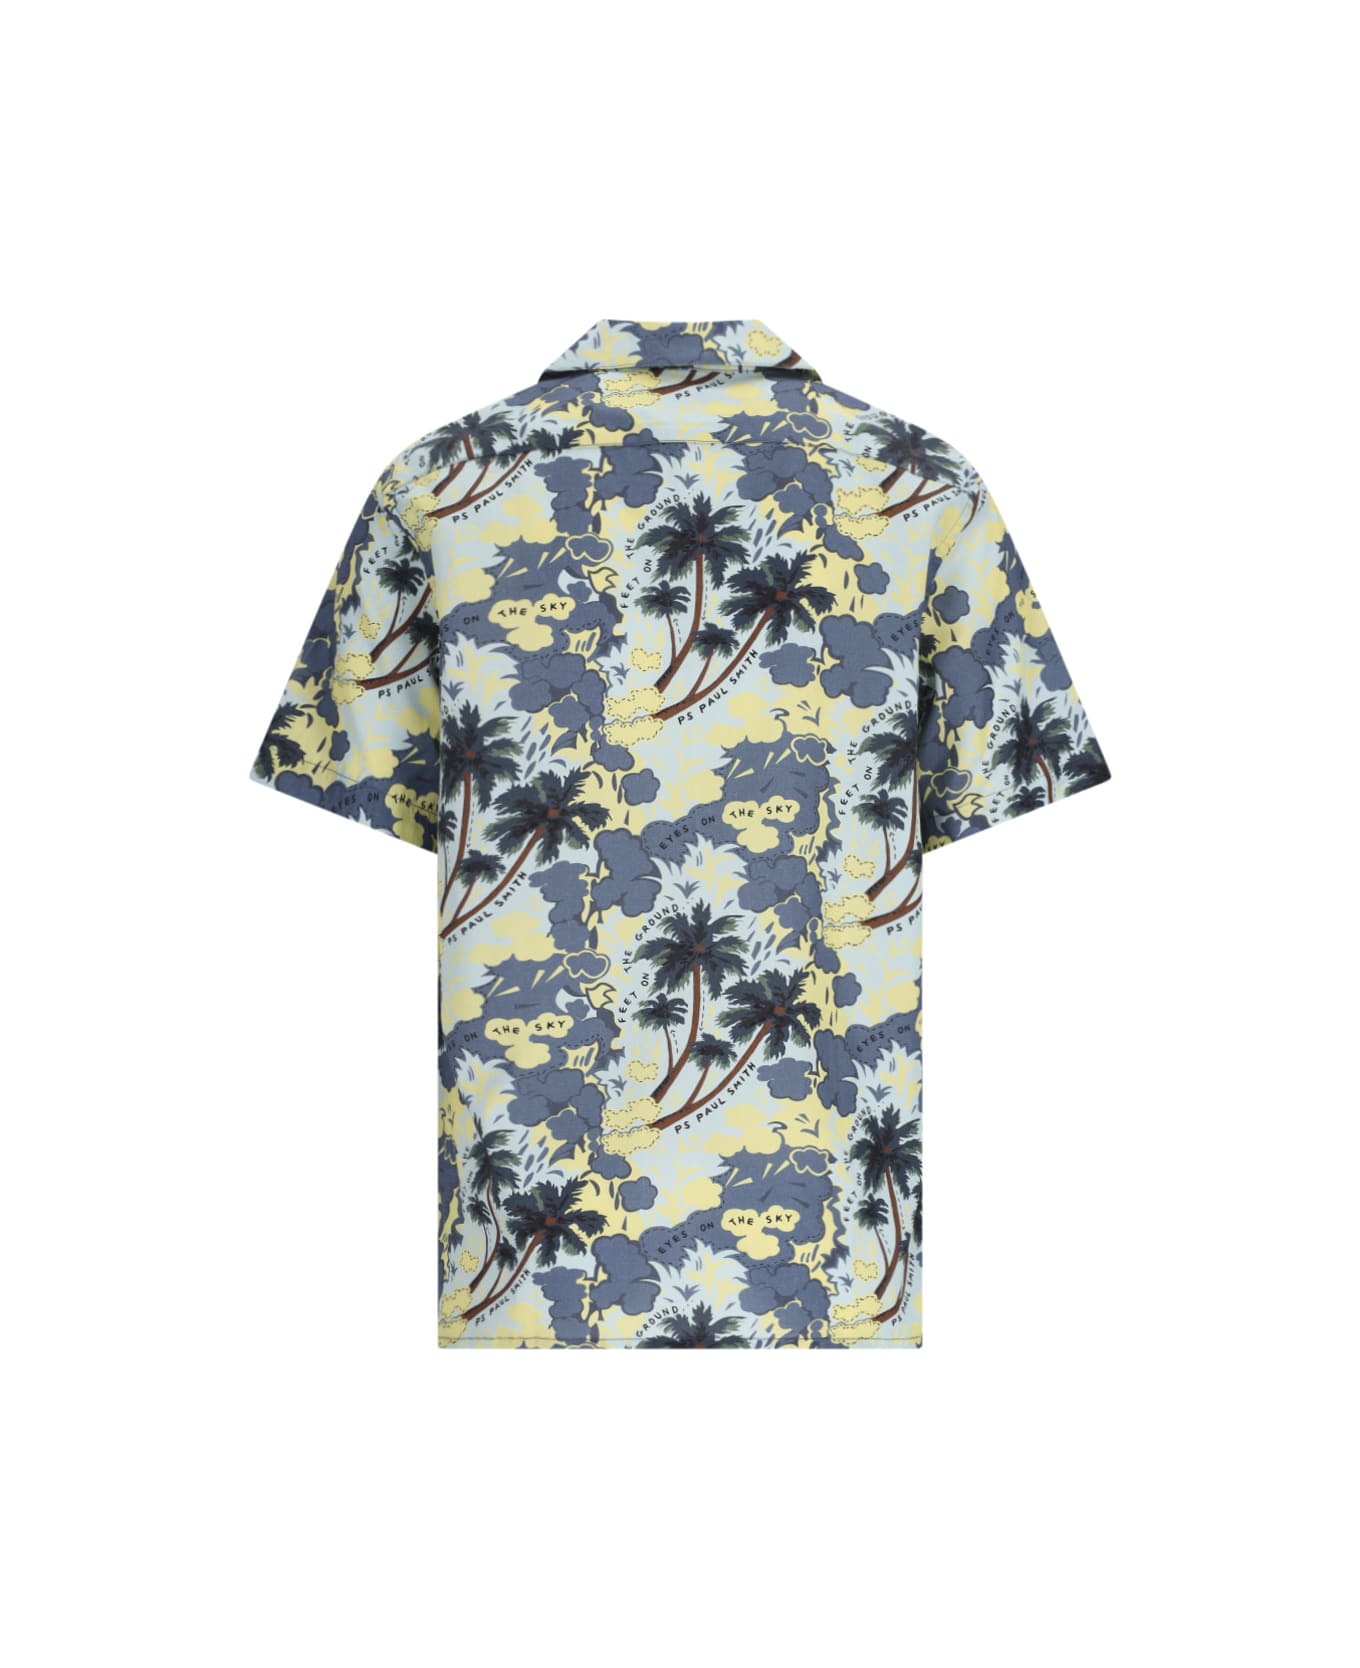 Paul Smith 'eyes In The Sky' Shirt - Multicolor